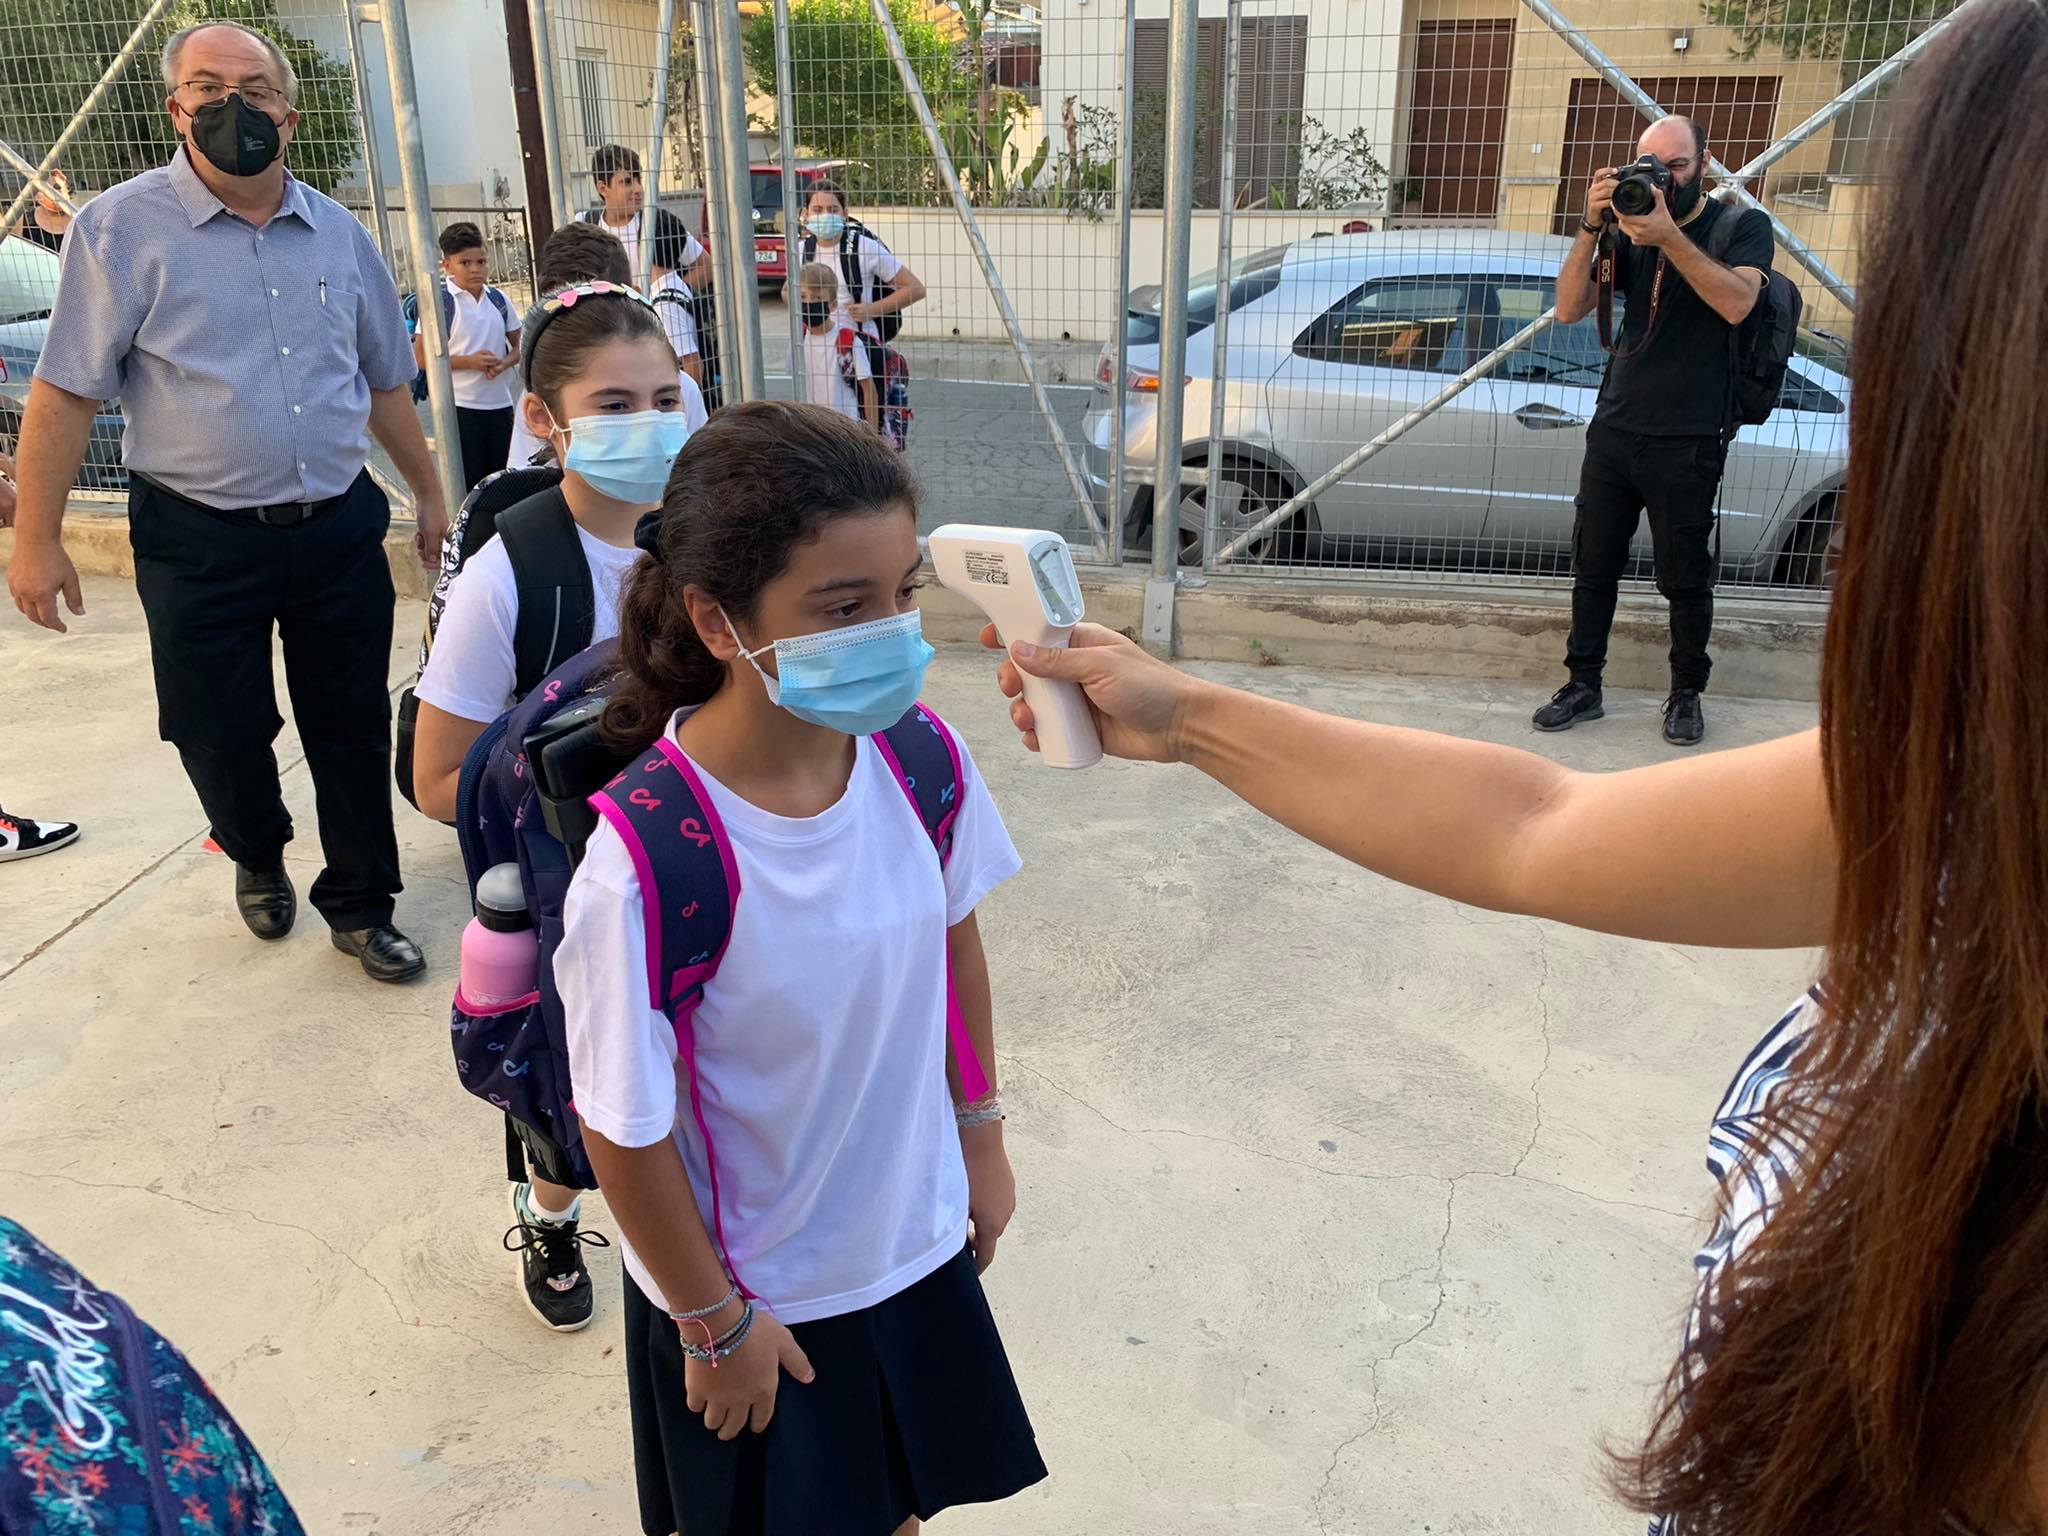 image Cypriot children among those most affected by Covid pandemic